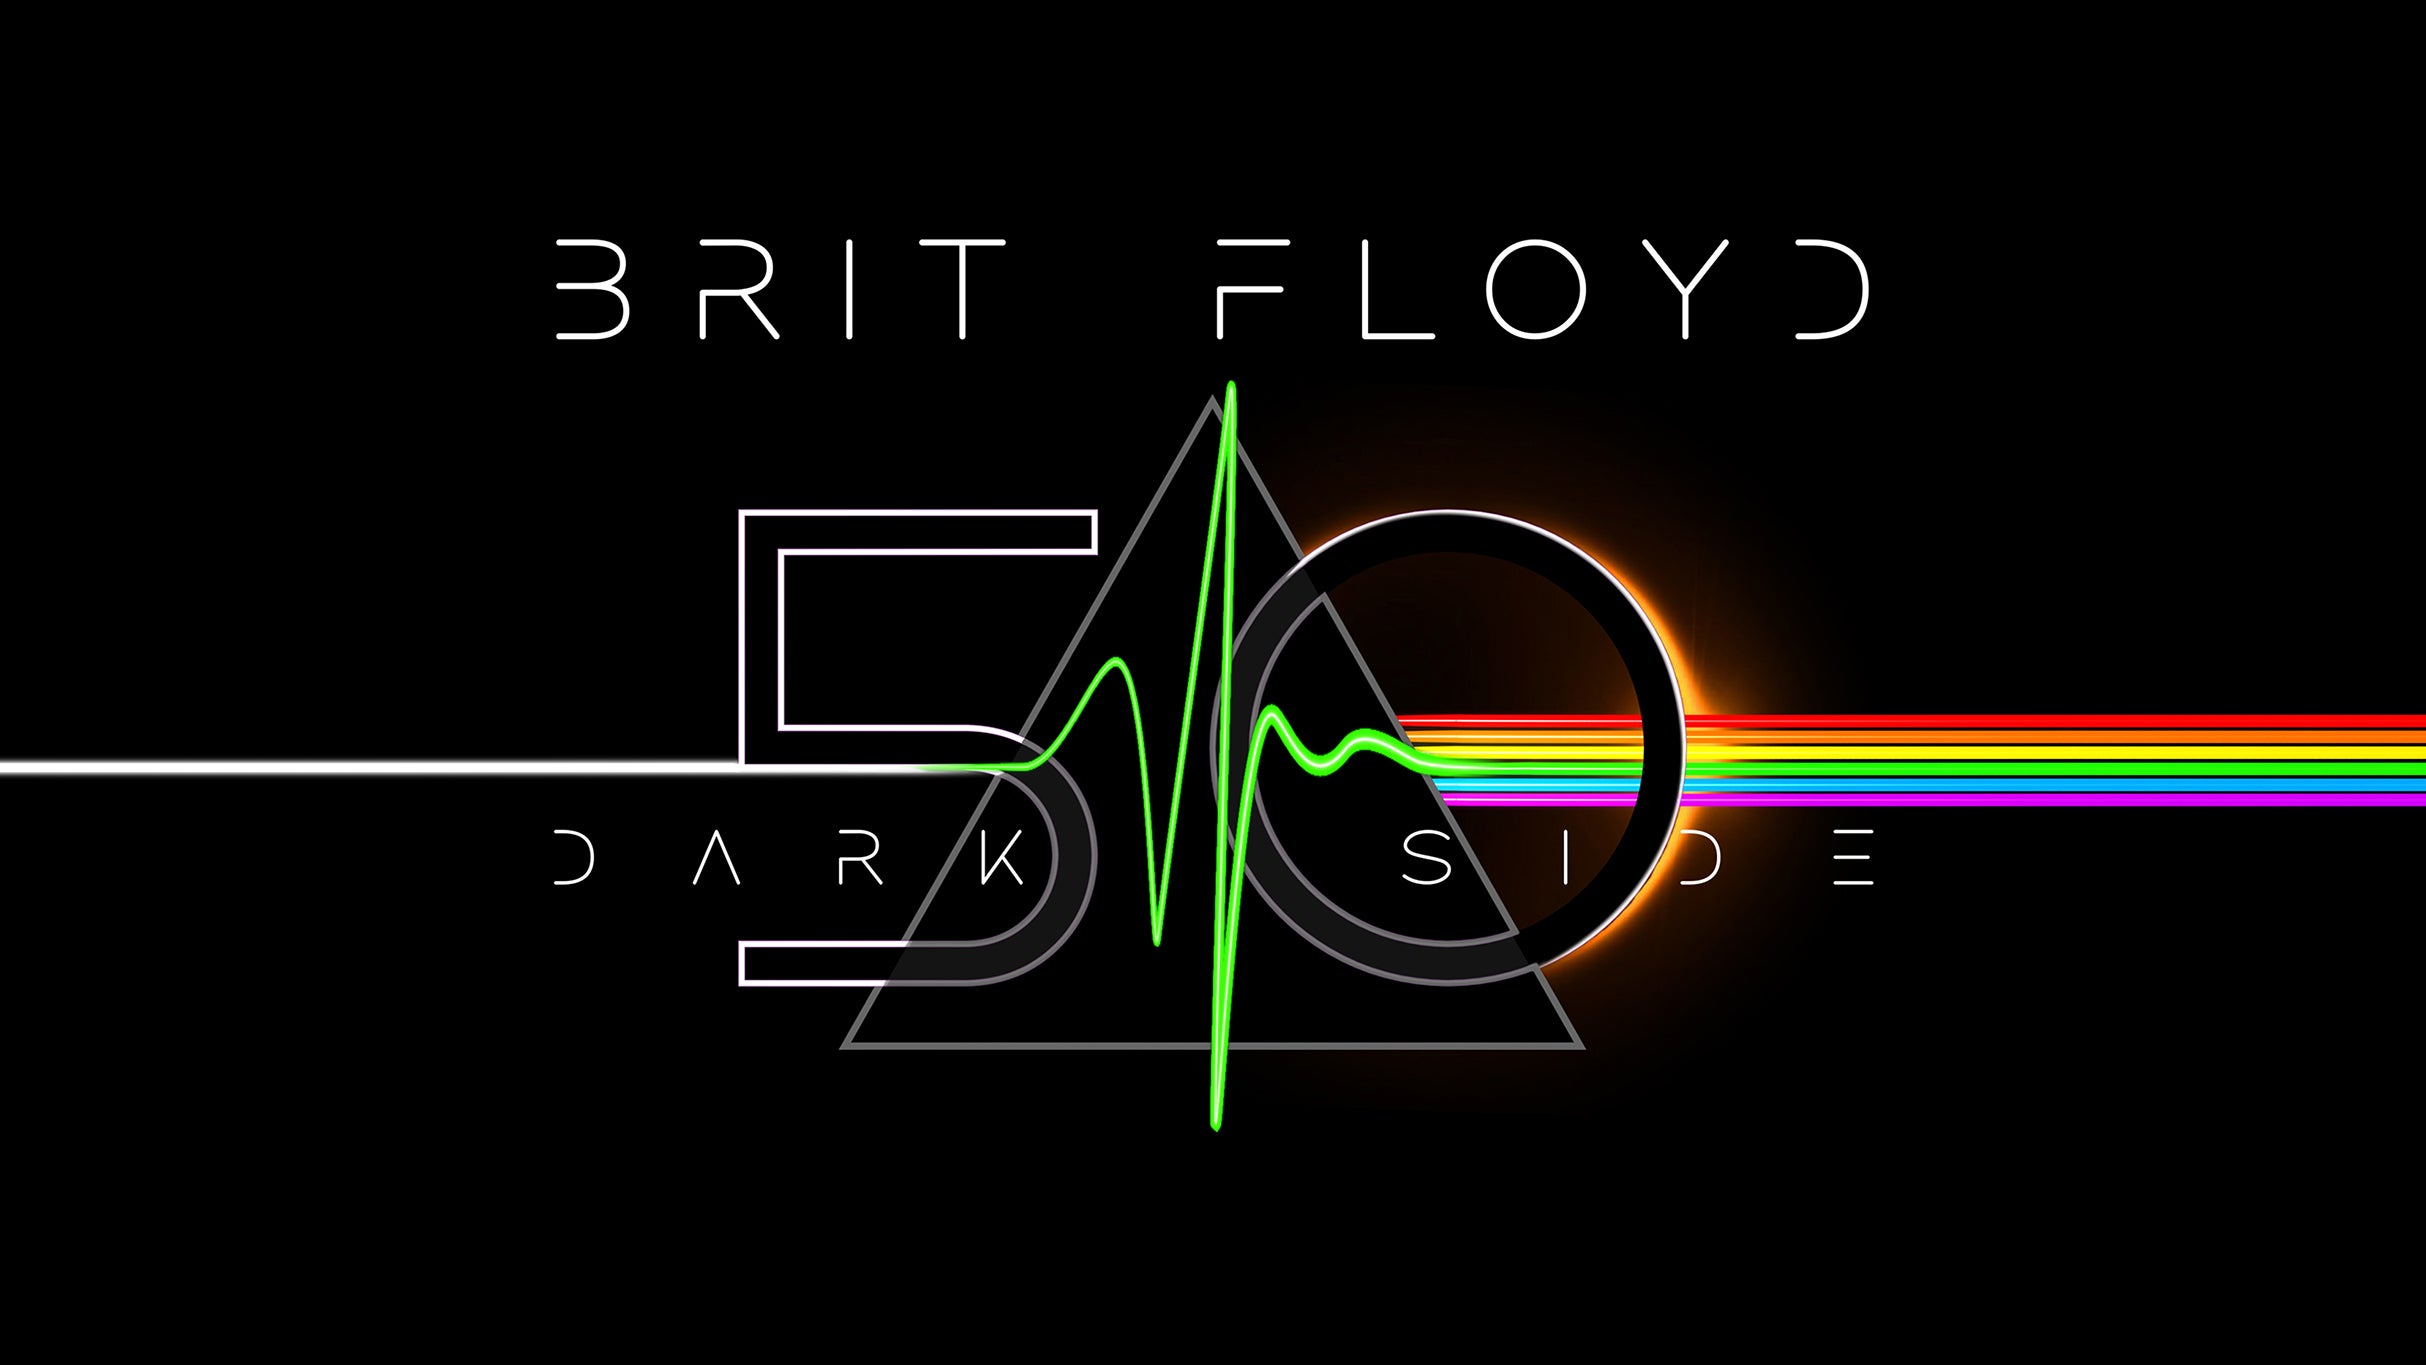 presale password for Brit Floyd advanced tickets in Wallingford